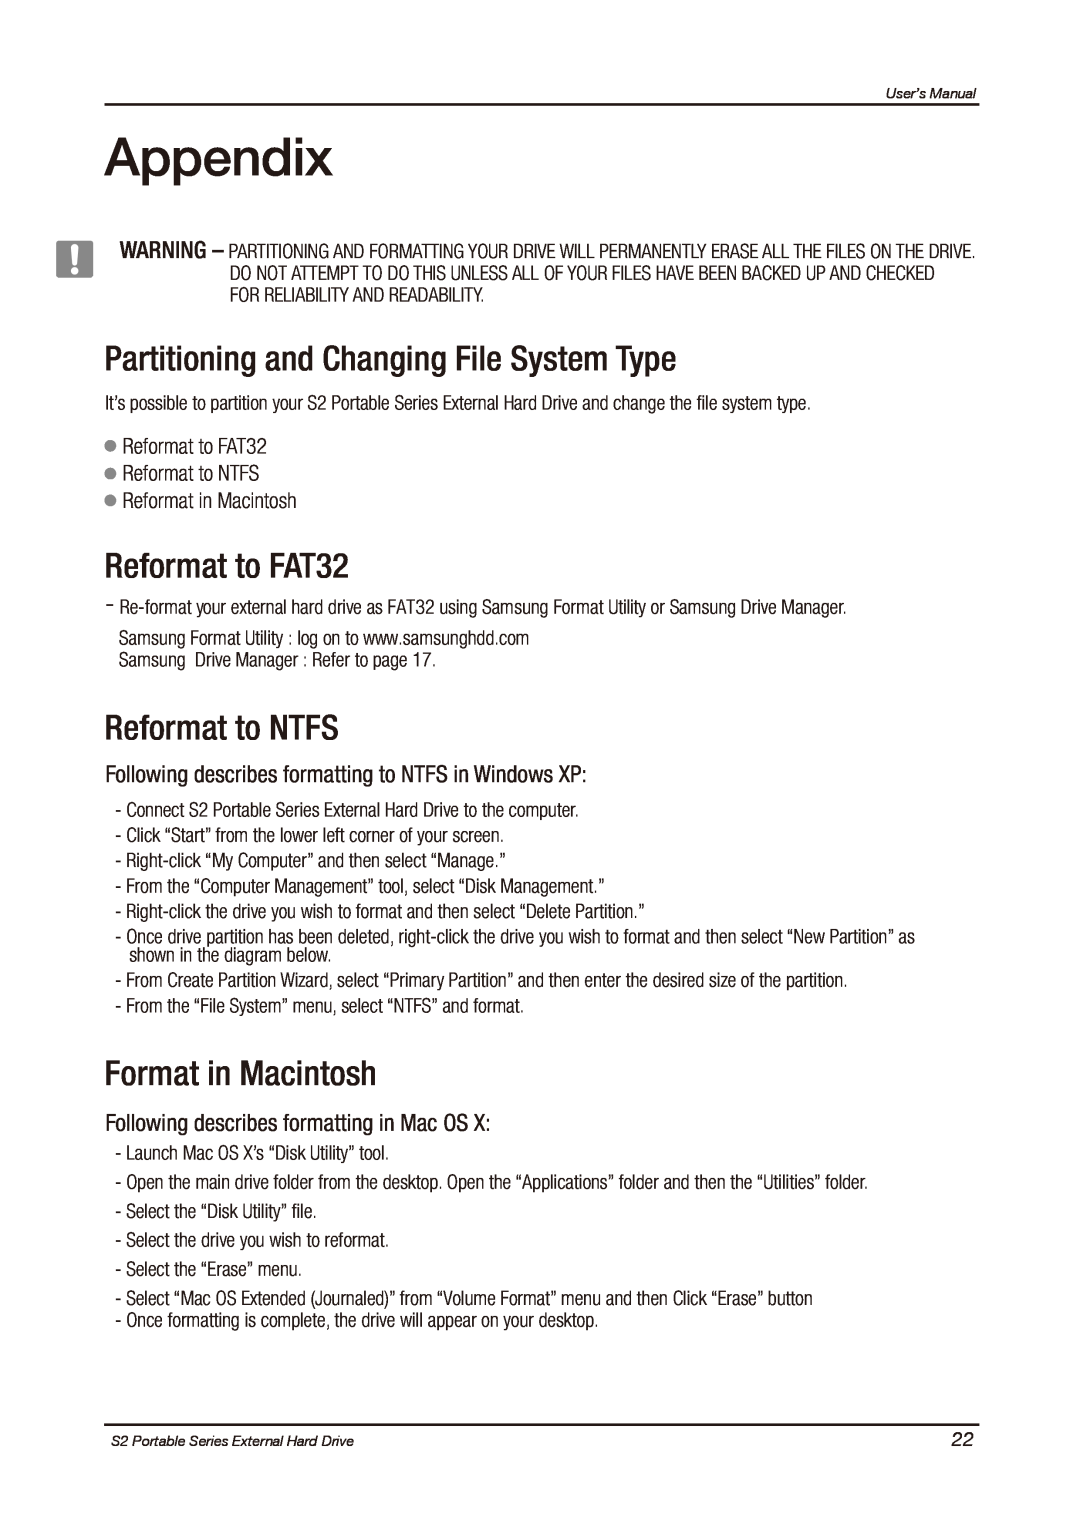 Samsung HXMU016DA user manual Appendix, Partitioning and Changing File System Type, Reformat to FAT32, Reformat to NTFS 